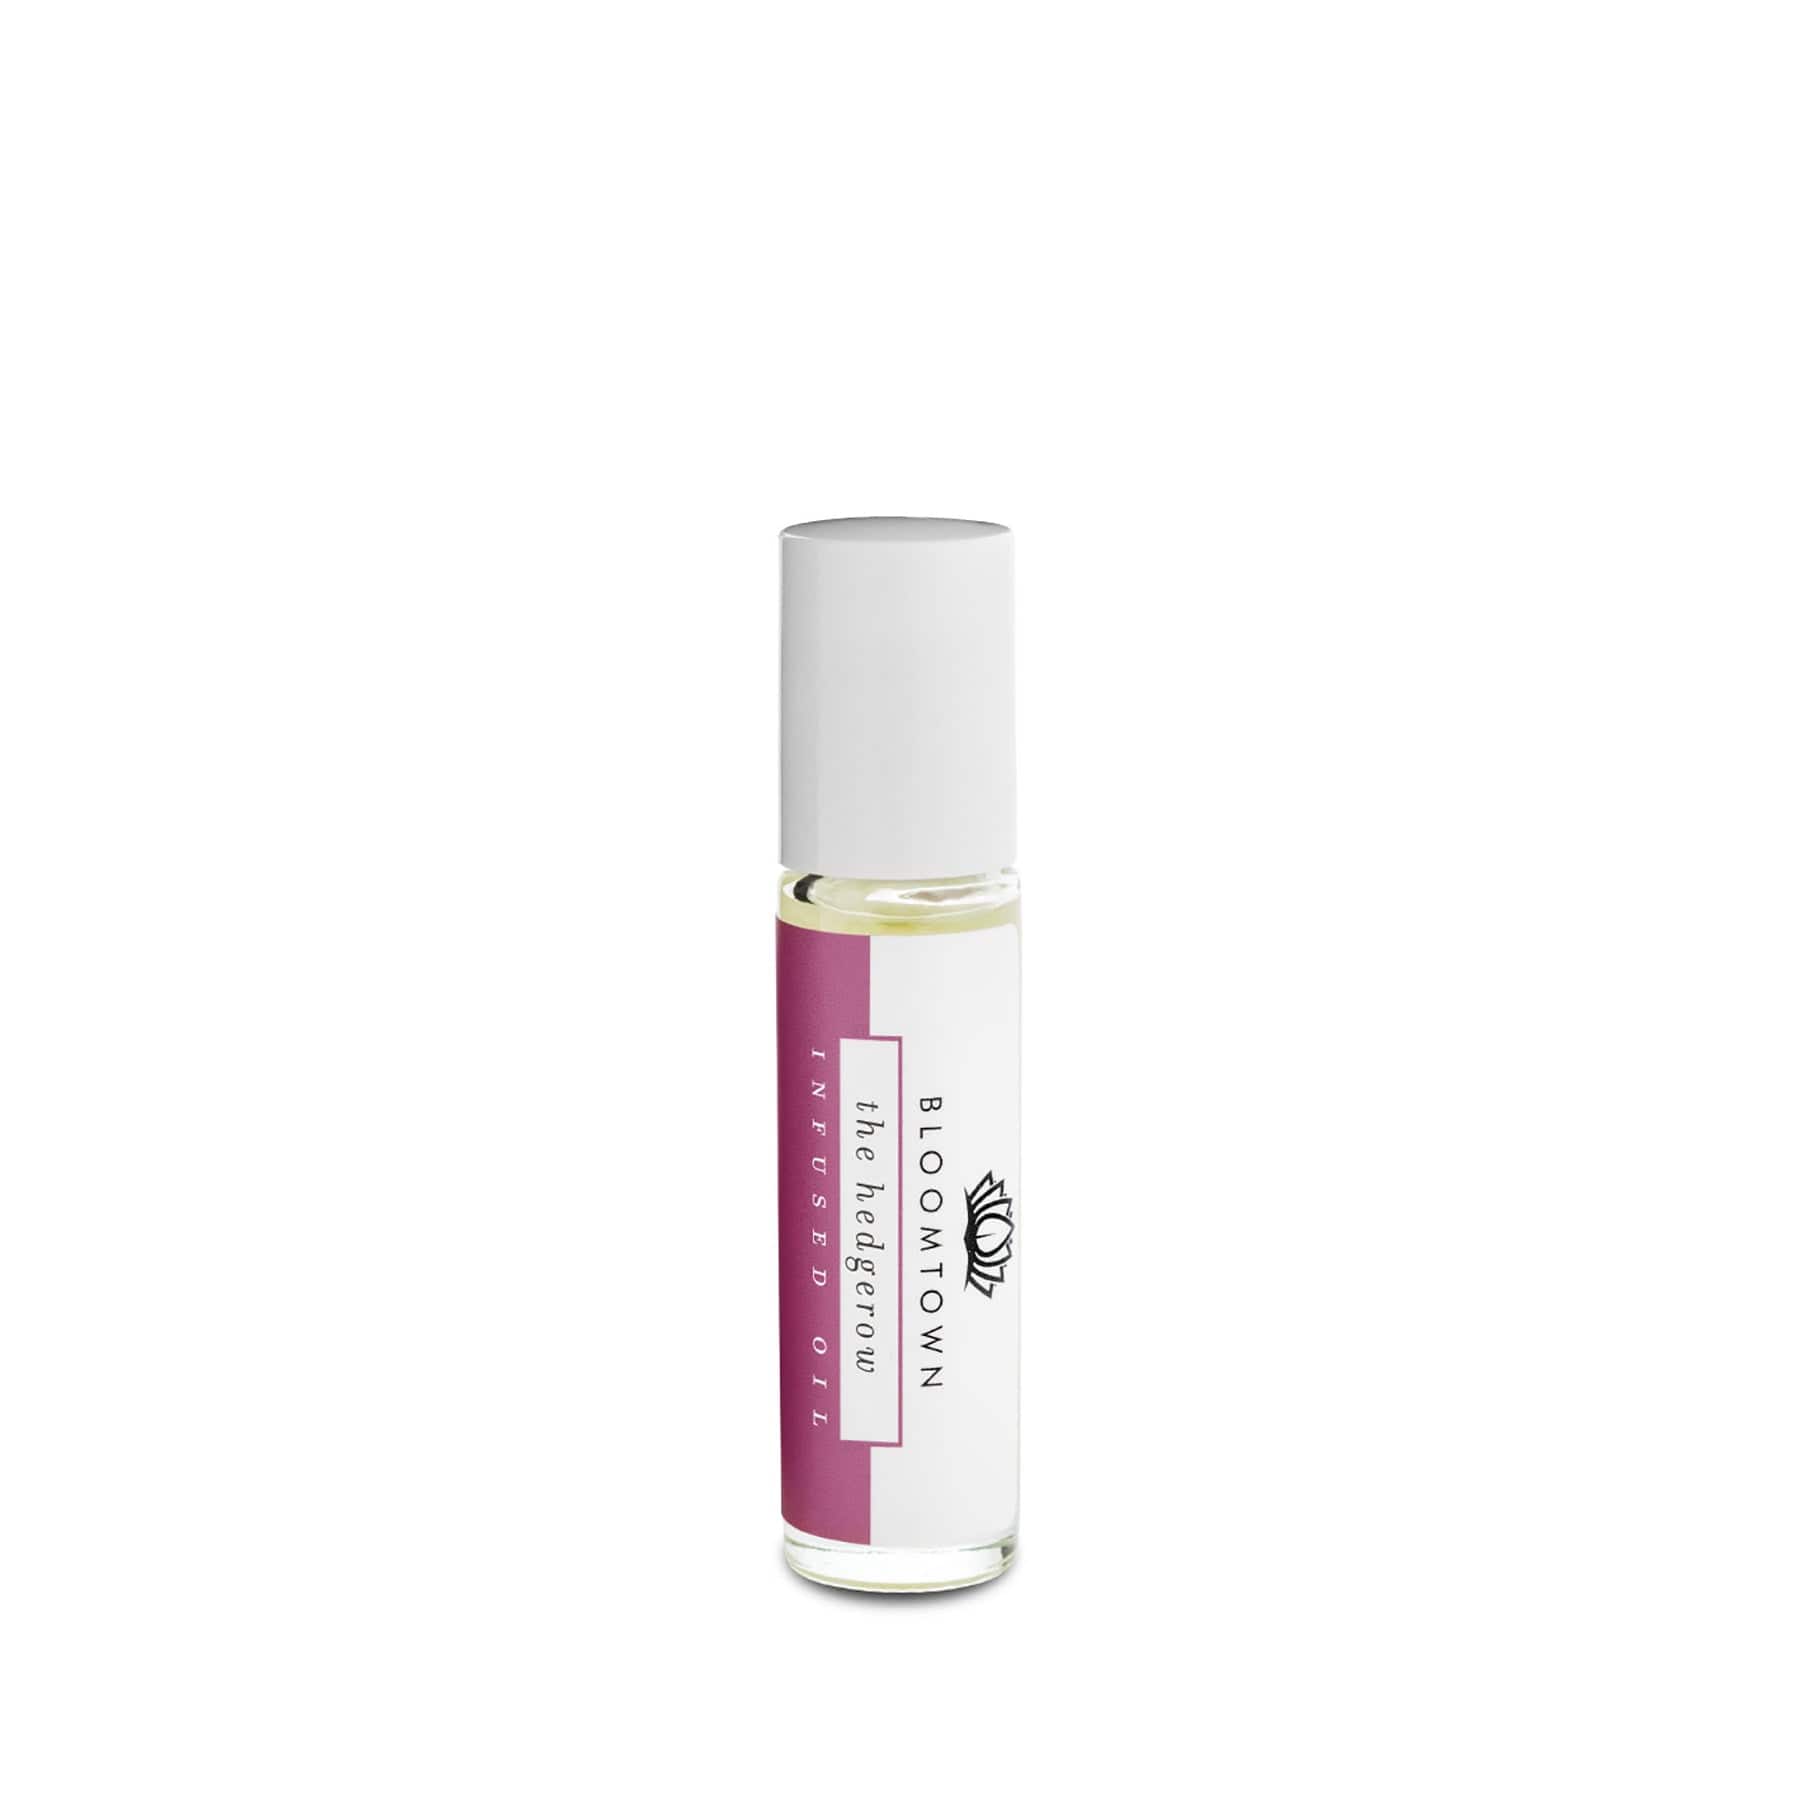 Rollerball perfume oil, Bloomtown brand, The Hedgerow, infused with berries and meadow flowers, personal care, beauty product, white background.